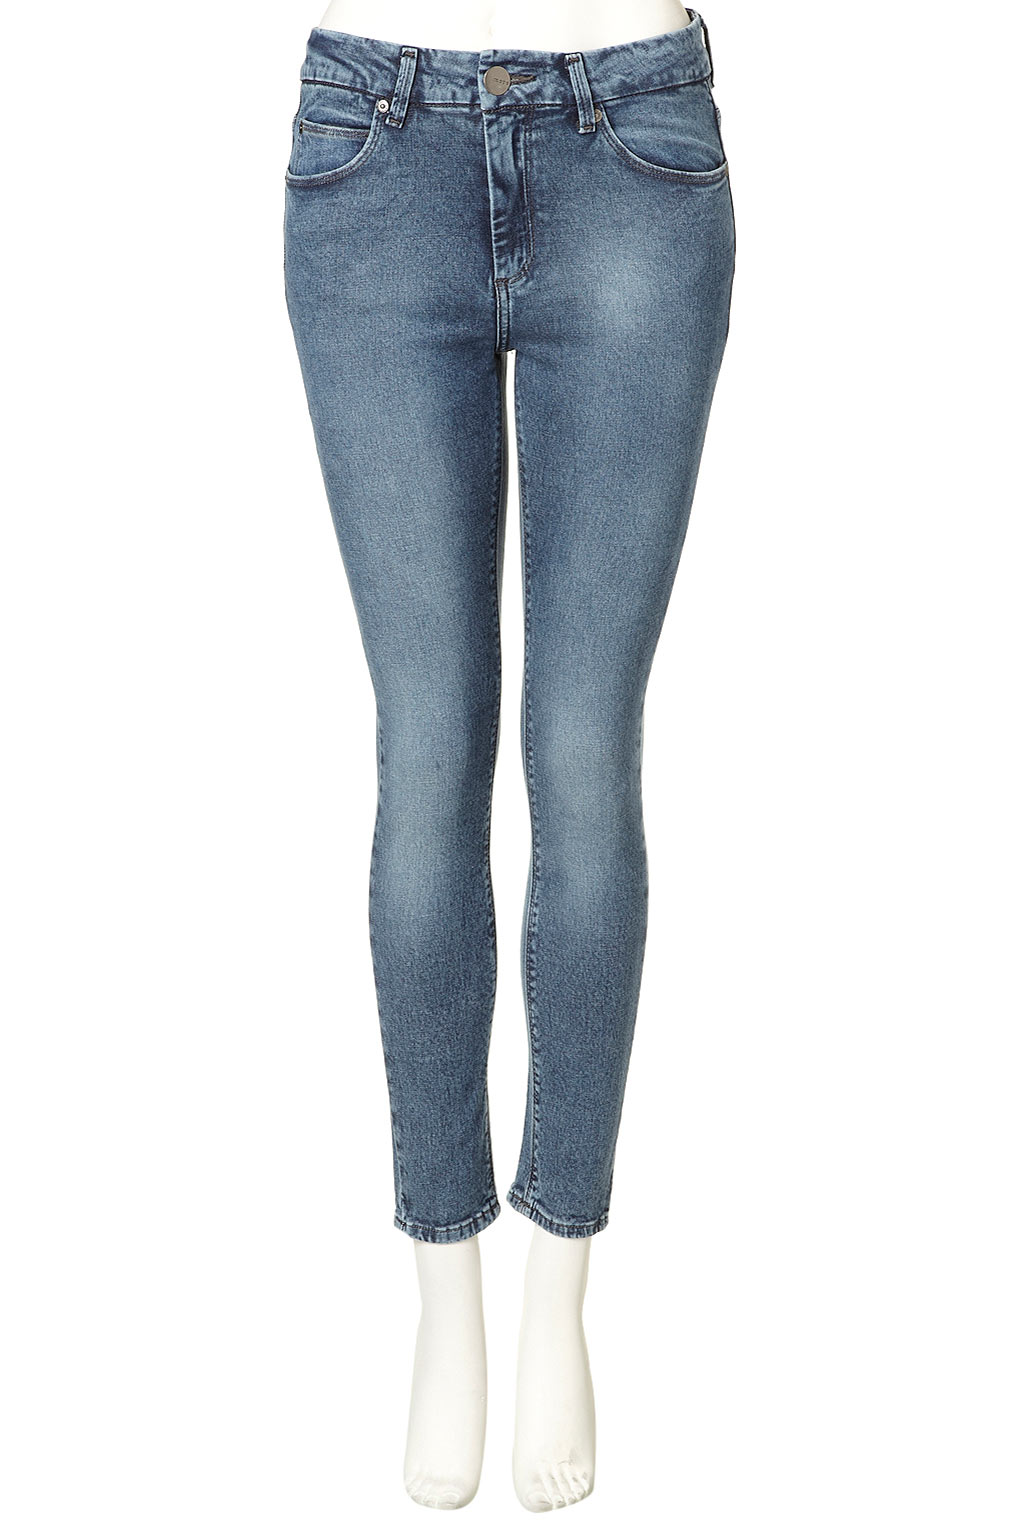 topshop high waisted skinny jeans